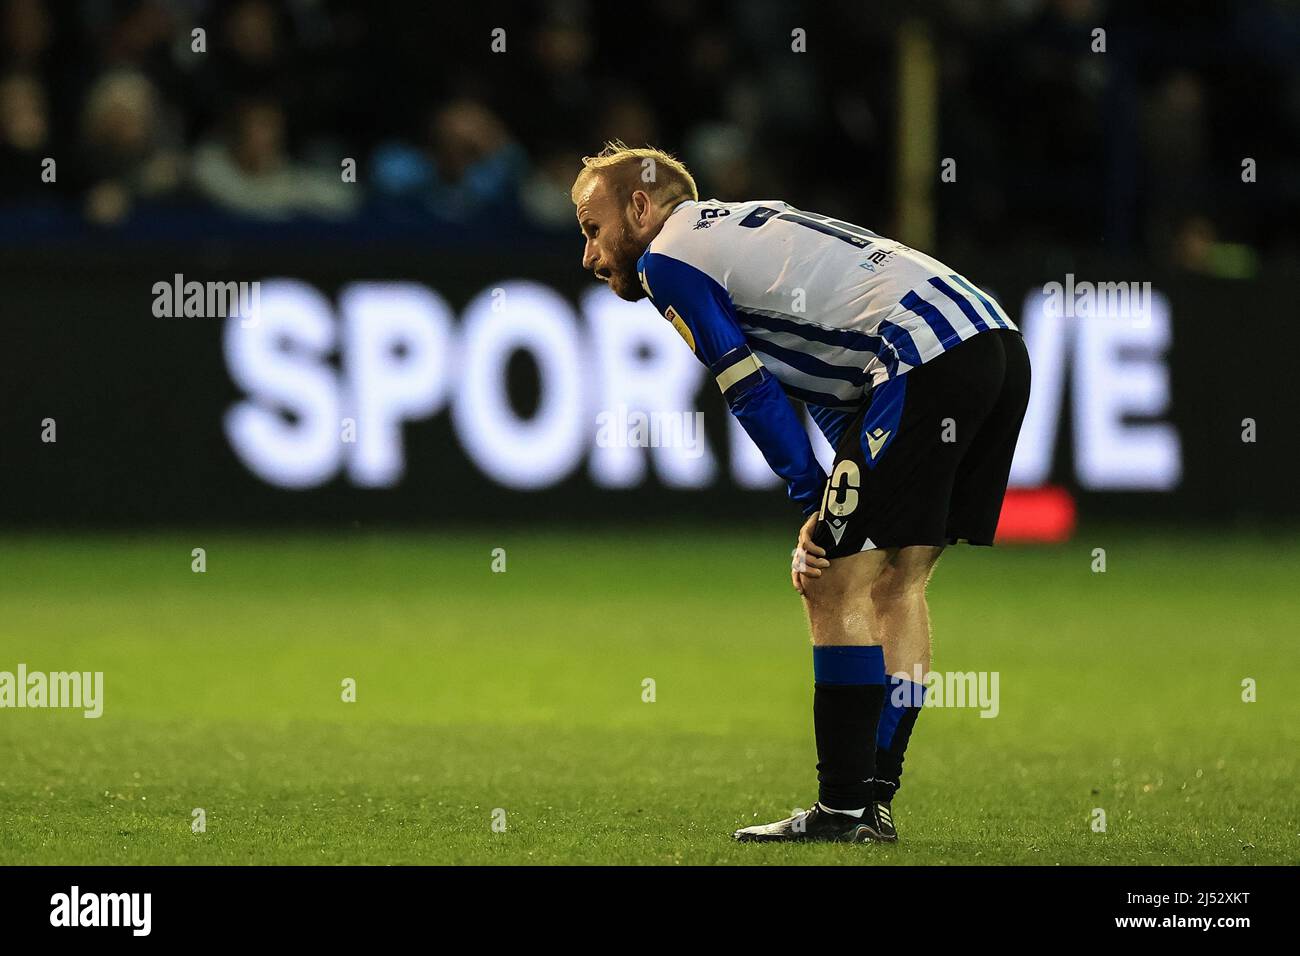 Barry Bannan #10 of Sheffield Wednesday pauses to catch his breath after making a run Stock Photo